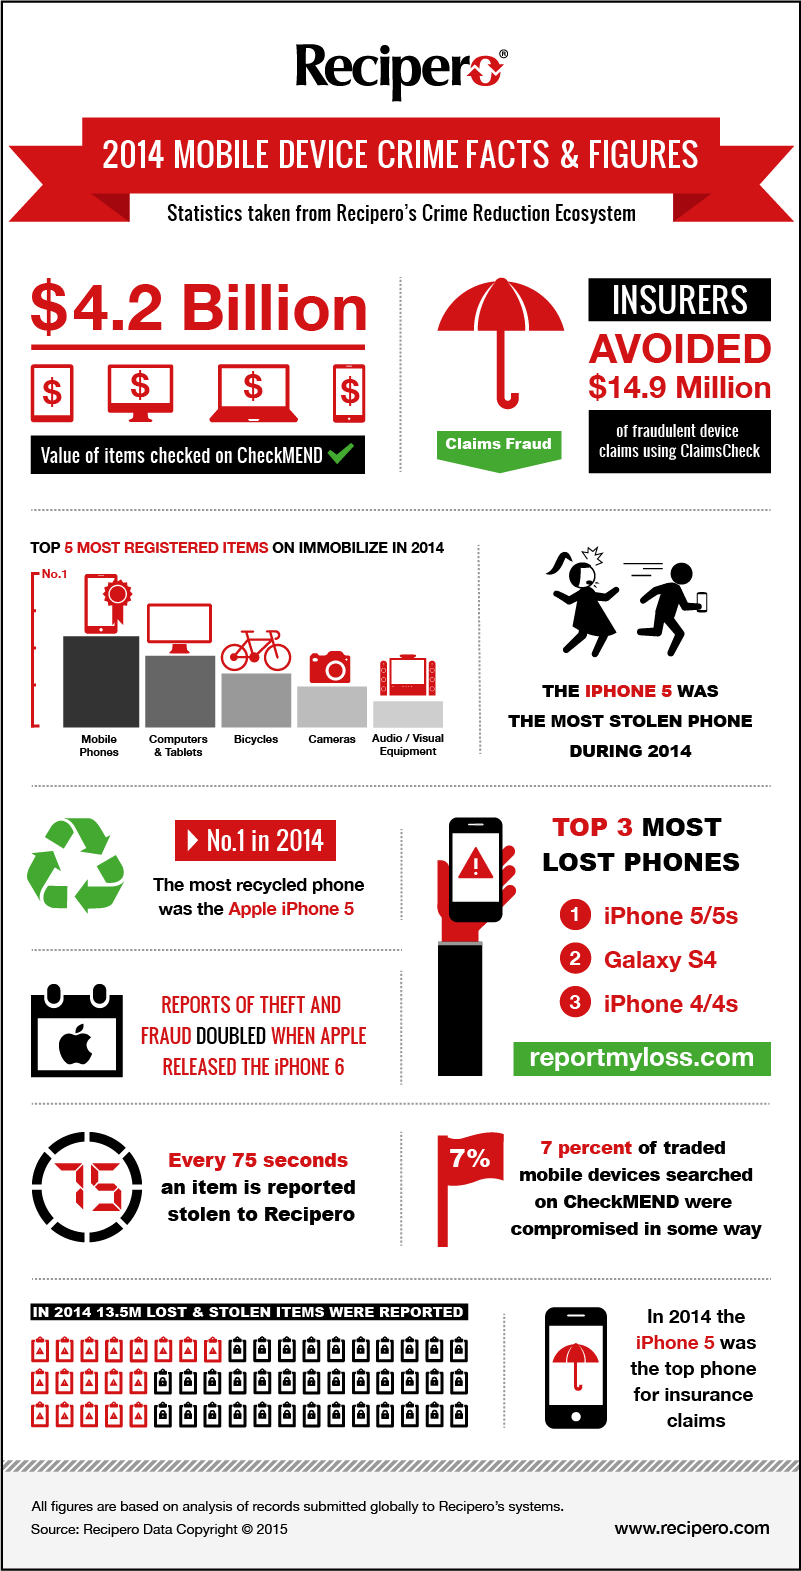 Recipero 2014 Mobile Device Crime Facts and Figures